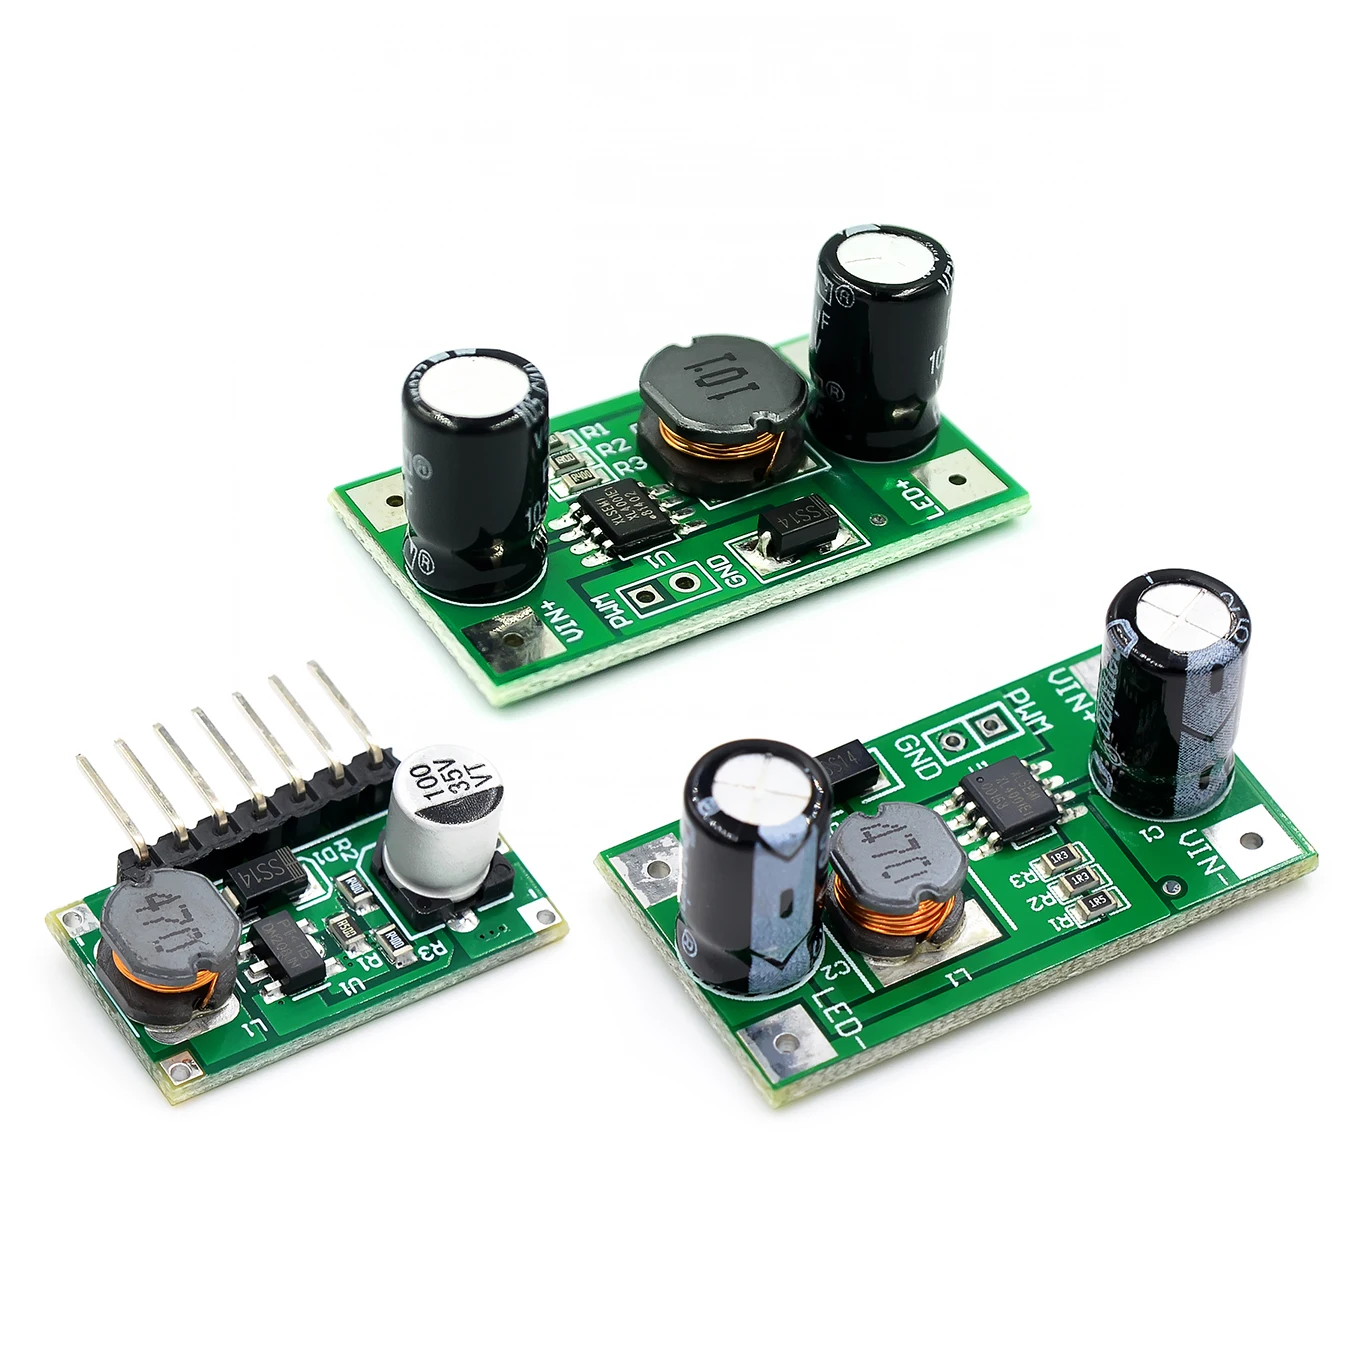 5PCS 3W 5-35V LED Driver 700mA PWM Dimming DC to DC Step-down Constant Current 